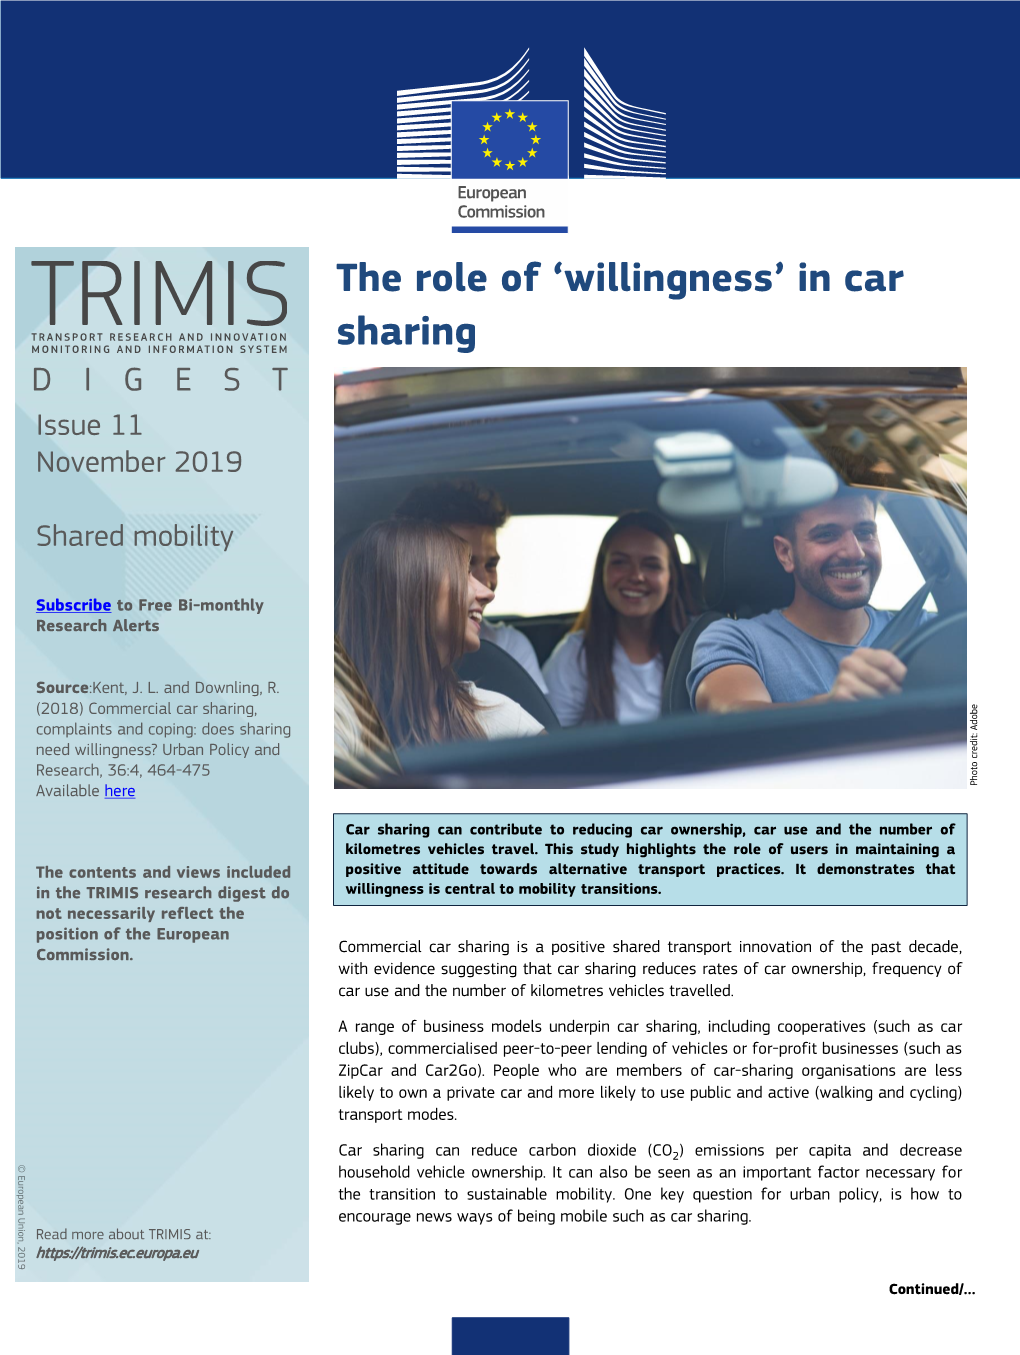 The Role of 'Willingness' in Car Sharing